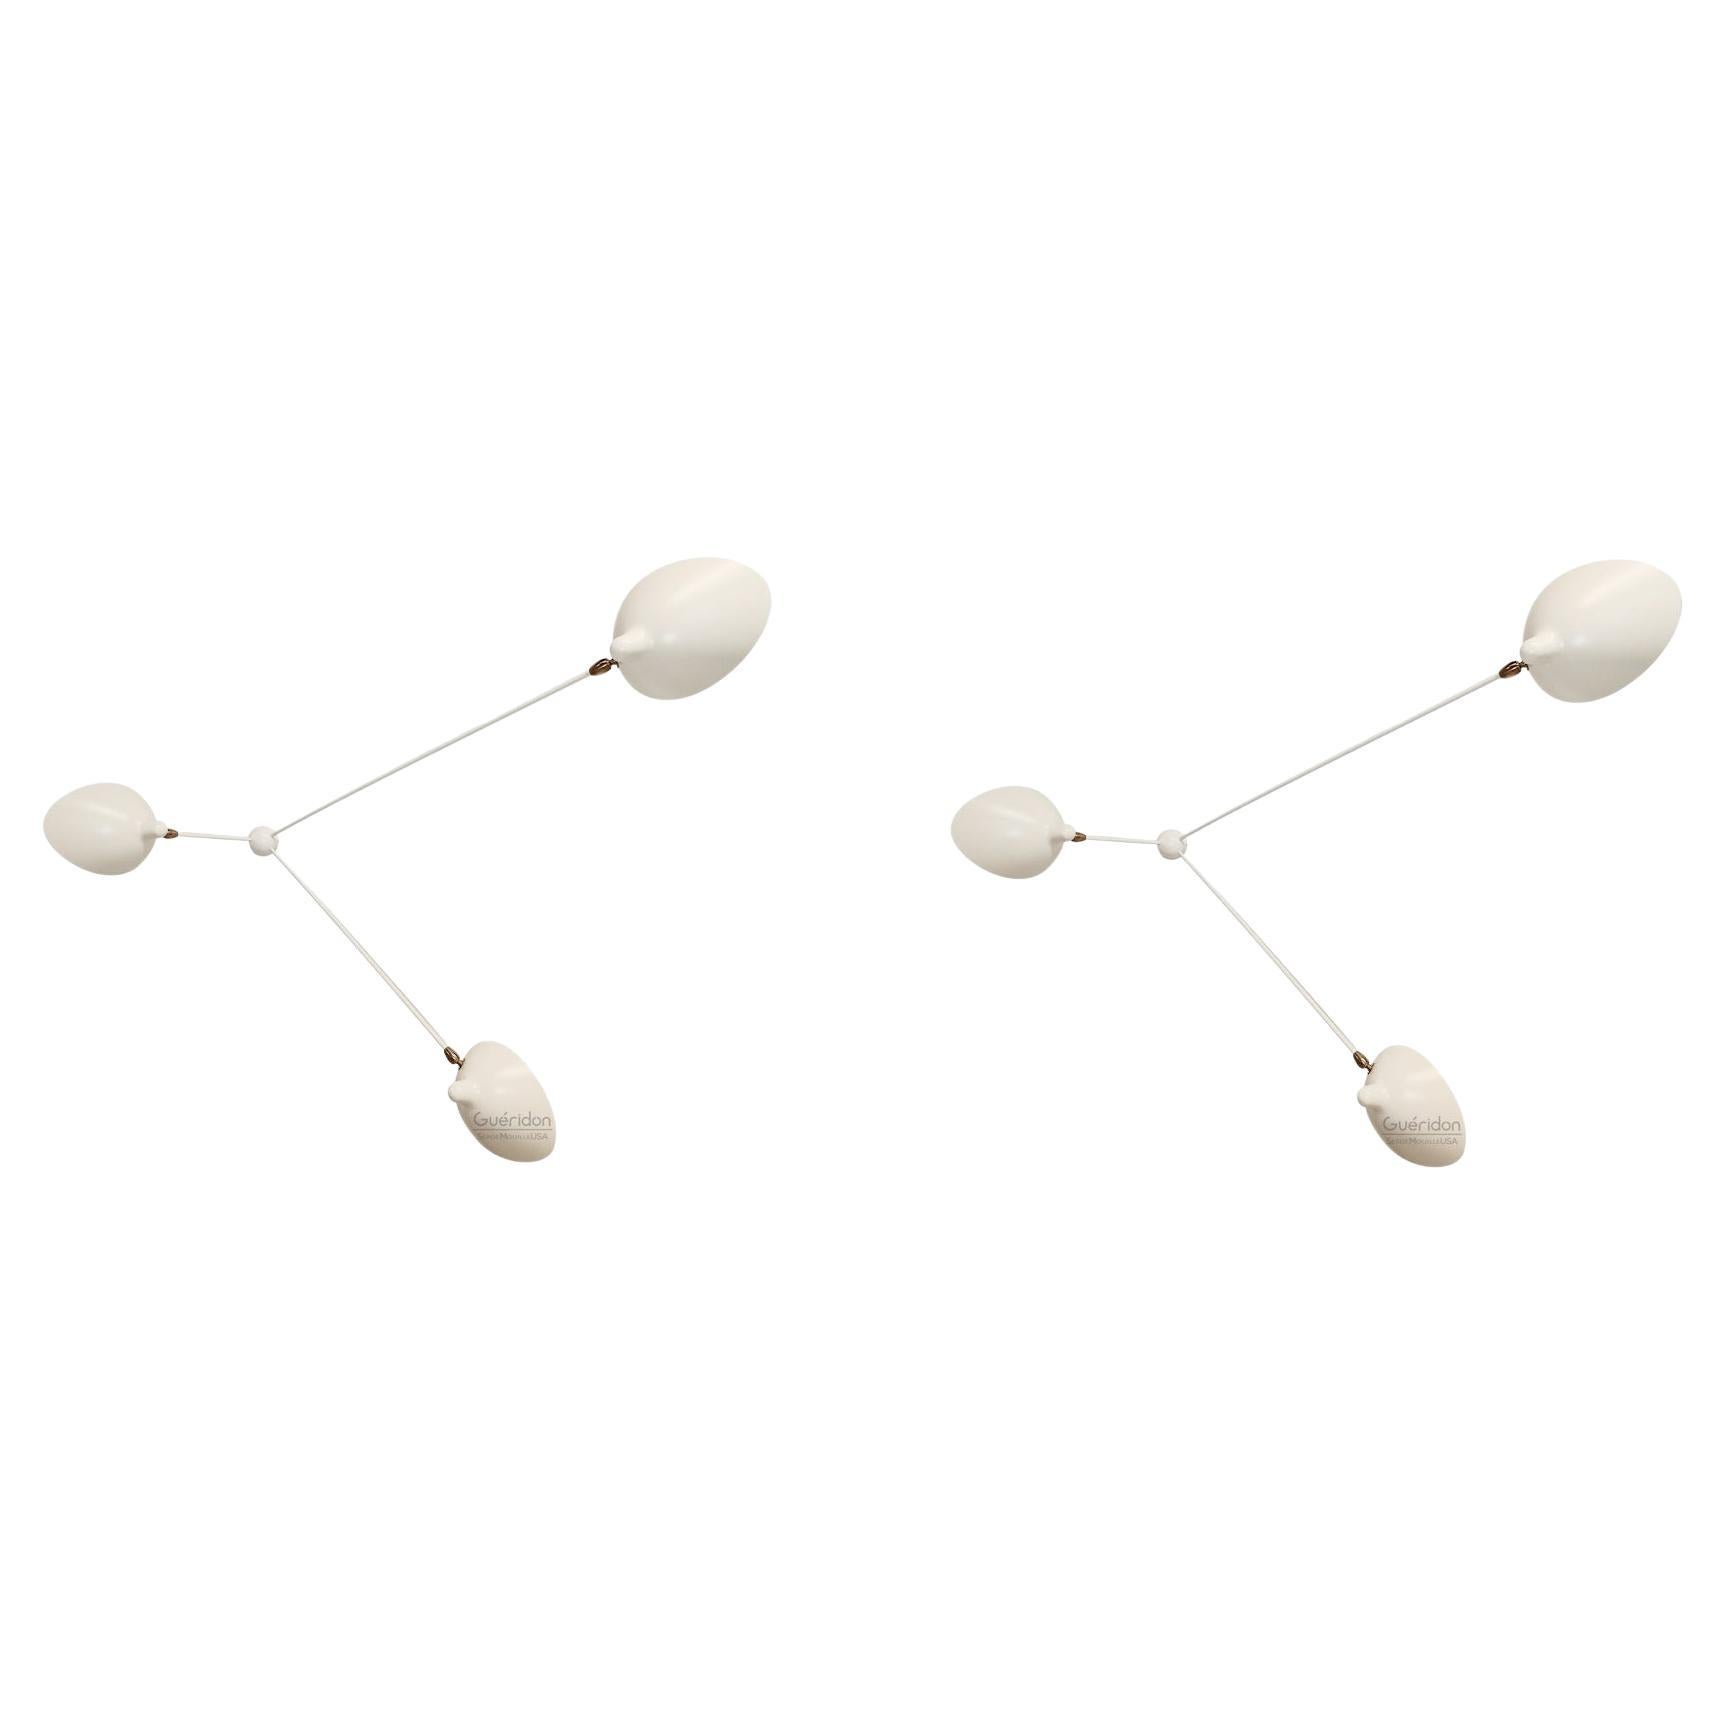 Serge Mouille - Pair of 3-Arm Spider Sconces in White - IN STOCK! For Sale